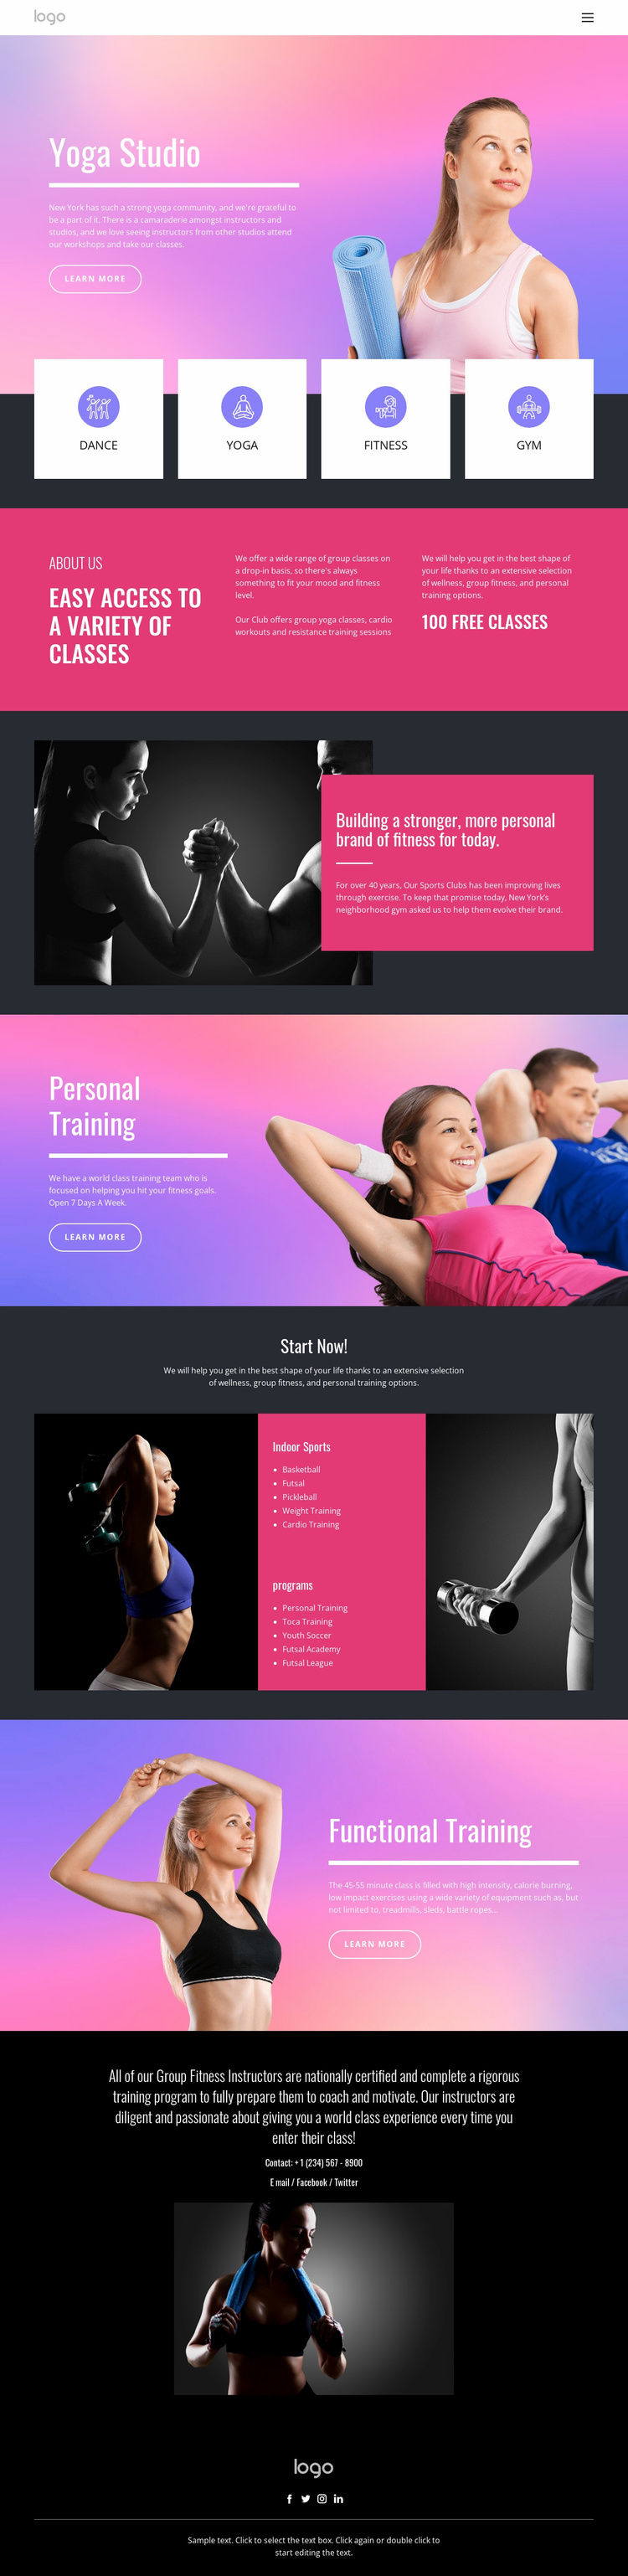 Wellness practice for self-inquiry Landing Page